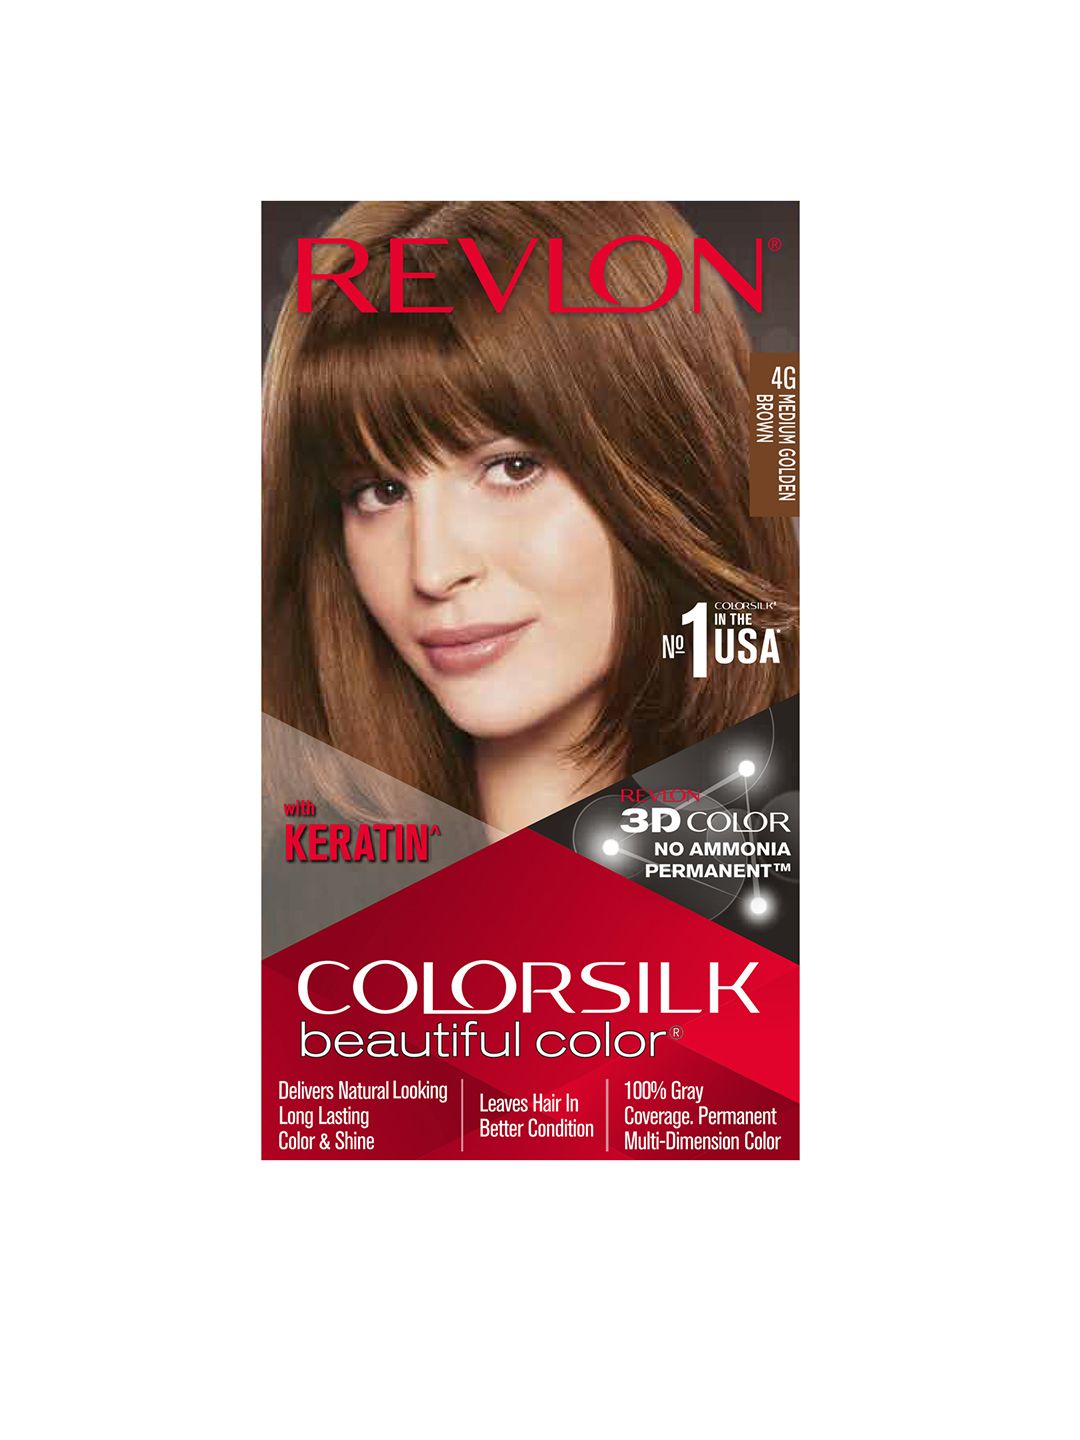 Revlon Color Silk Hair Color with Keratin - Medium Golden Brown 4G Price in India